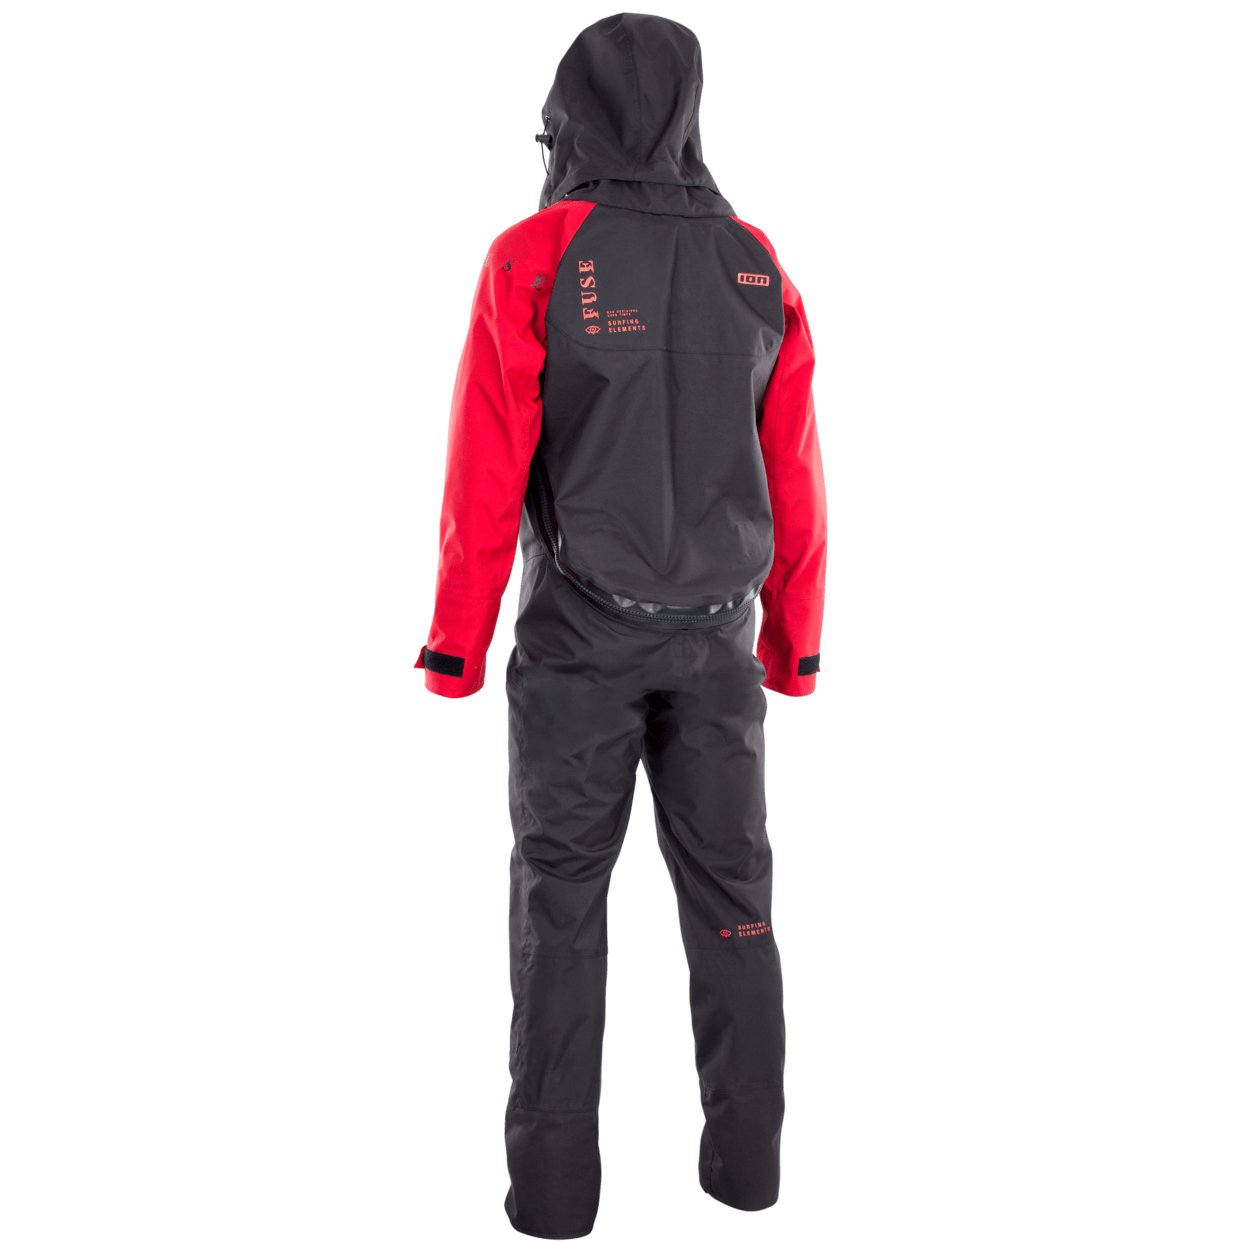 ION Fuse Lightweight Drysuit Back Zip 2022 - Worthing Watersports - 9010583008875 - Wetsuits - ION Water